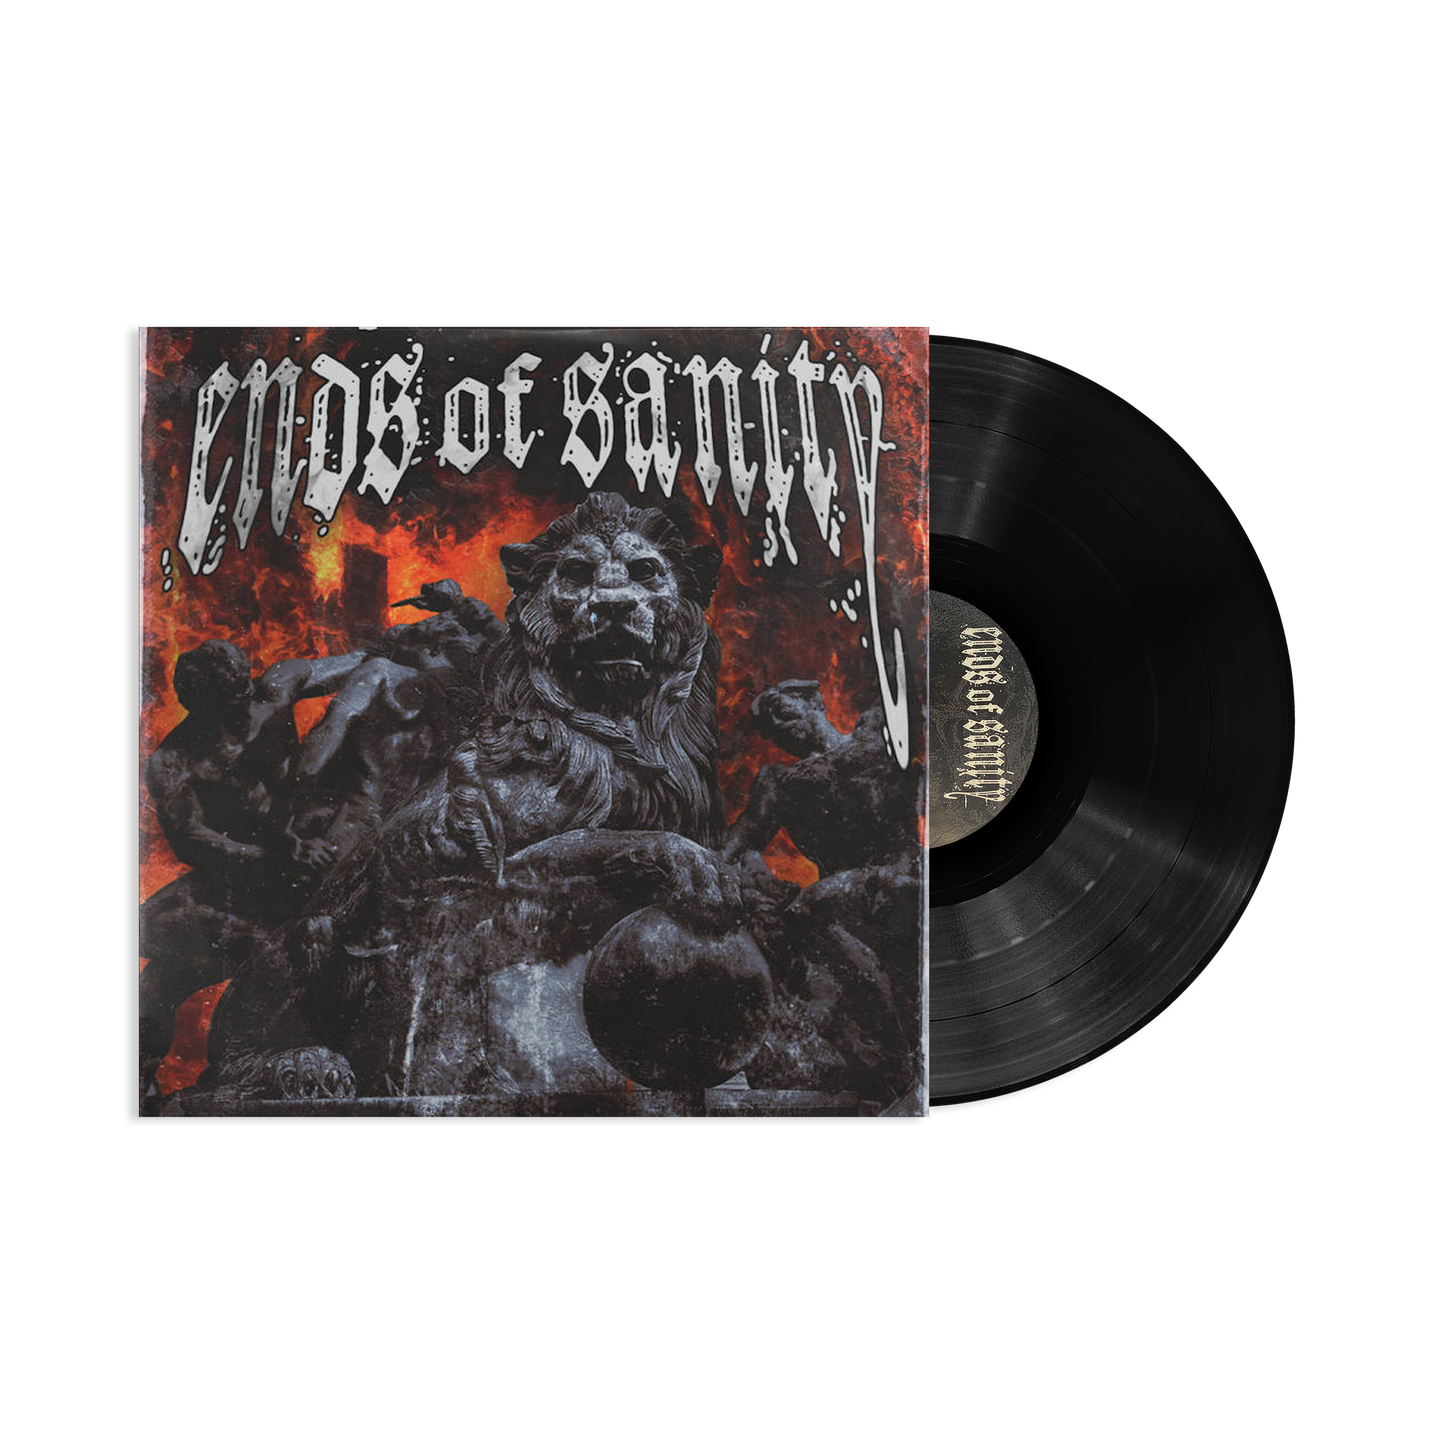 Ends Of Sanity  "Self Titled" LP